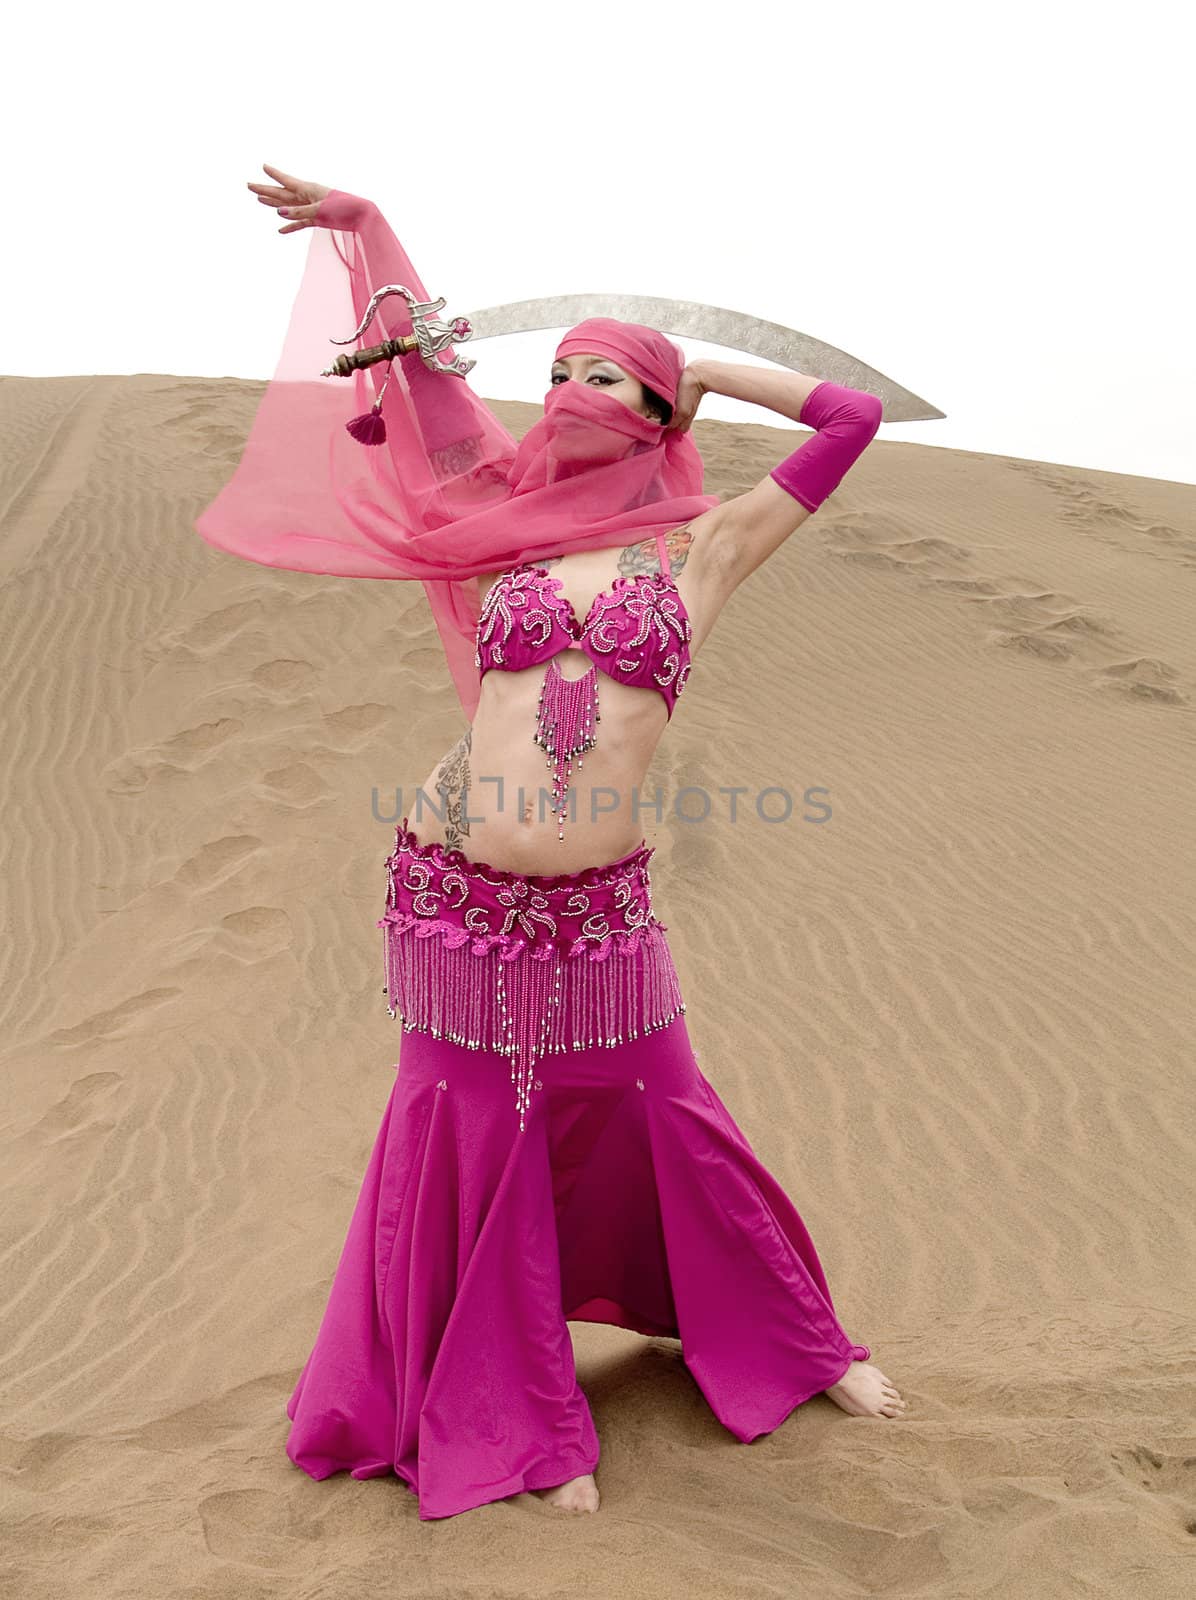 Touareg woman dancing at the desert with a sabre over her head